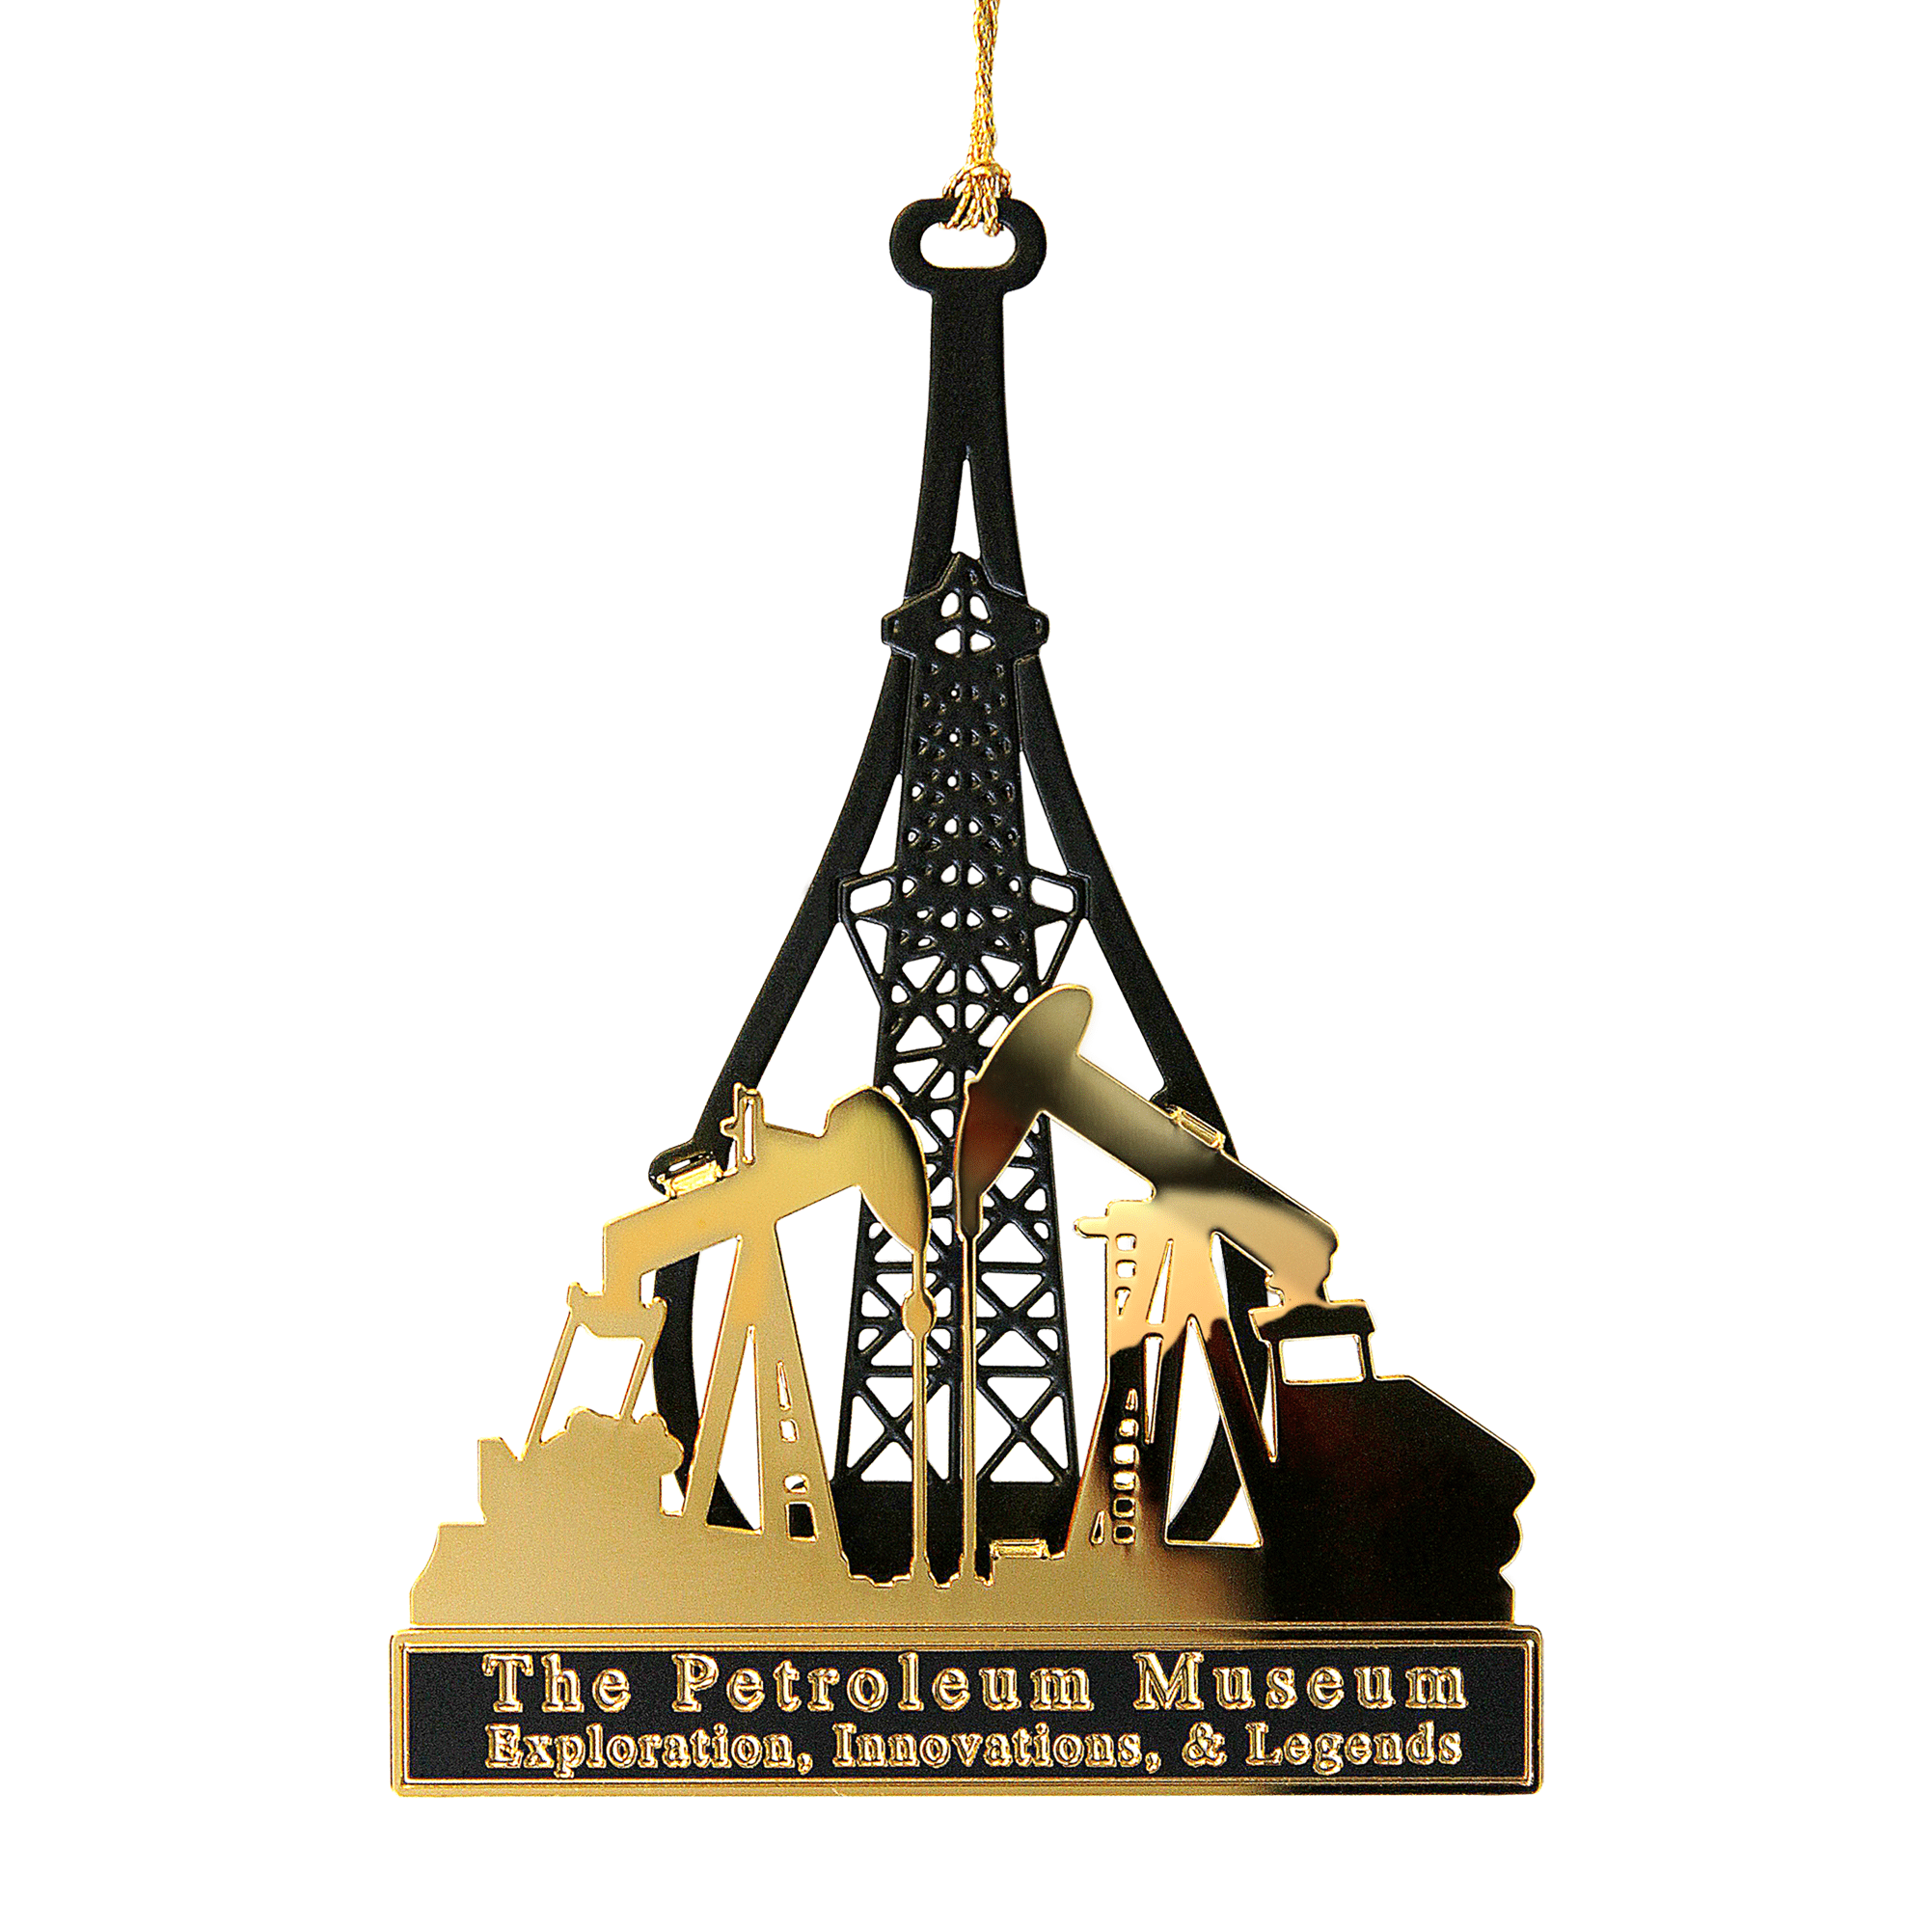 2D Brass Ornament Finished in 24K Gold, Silkscreen Printed and Black Powder Coated